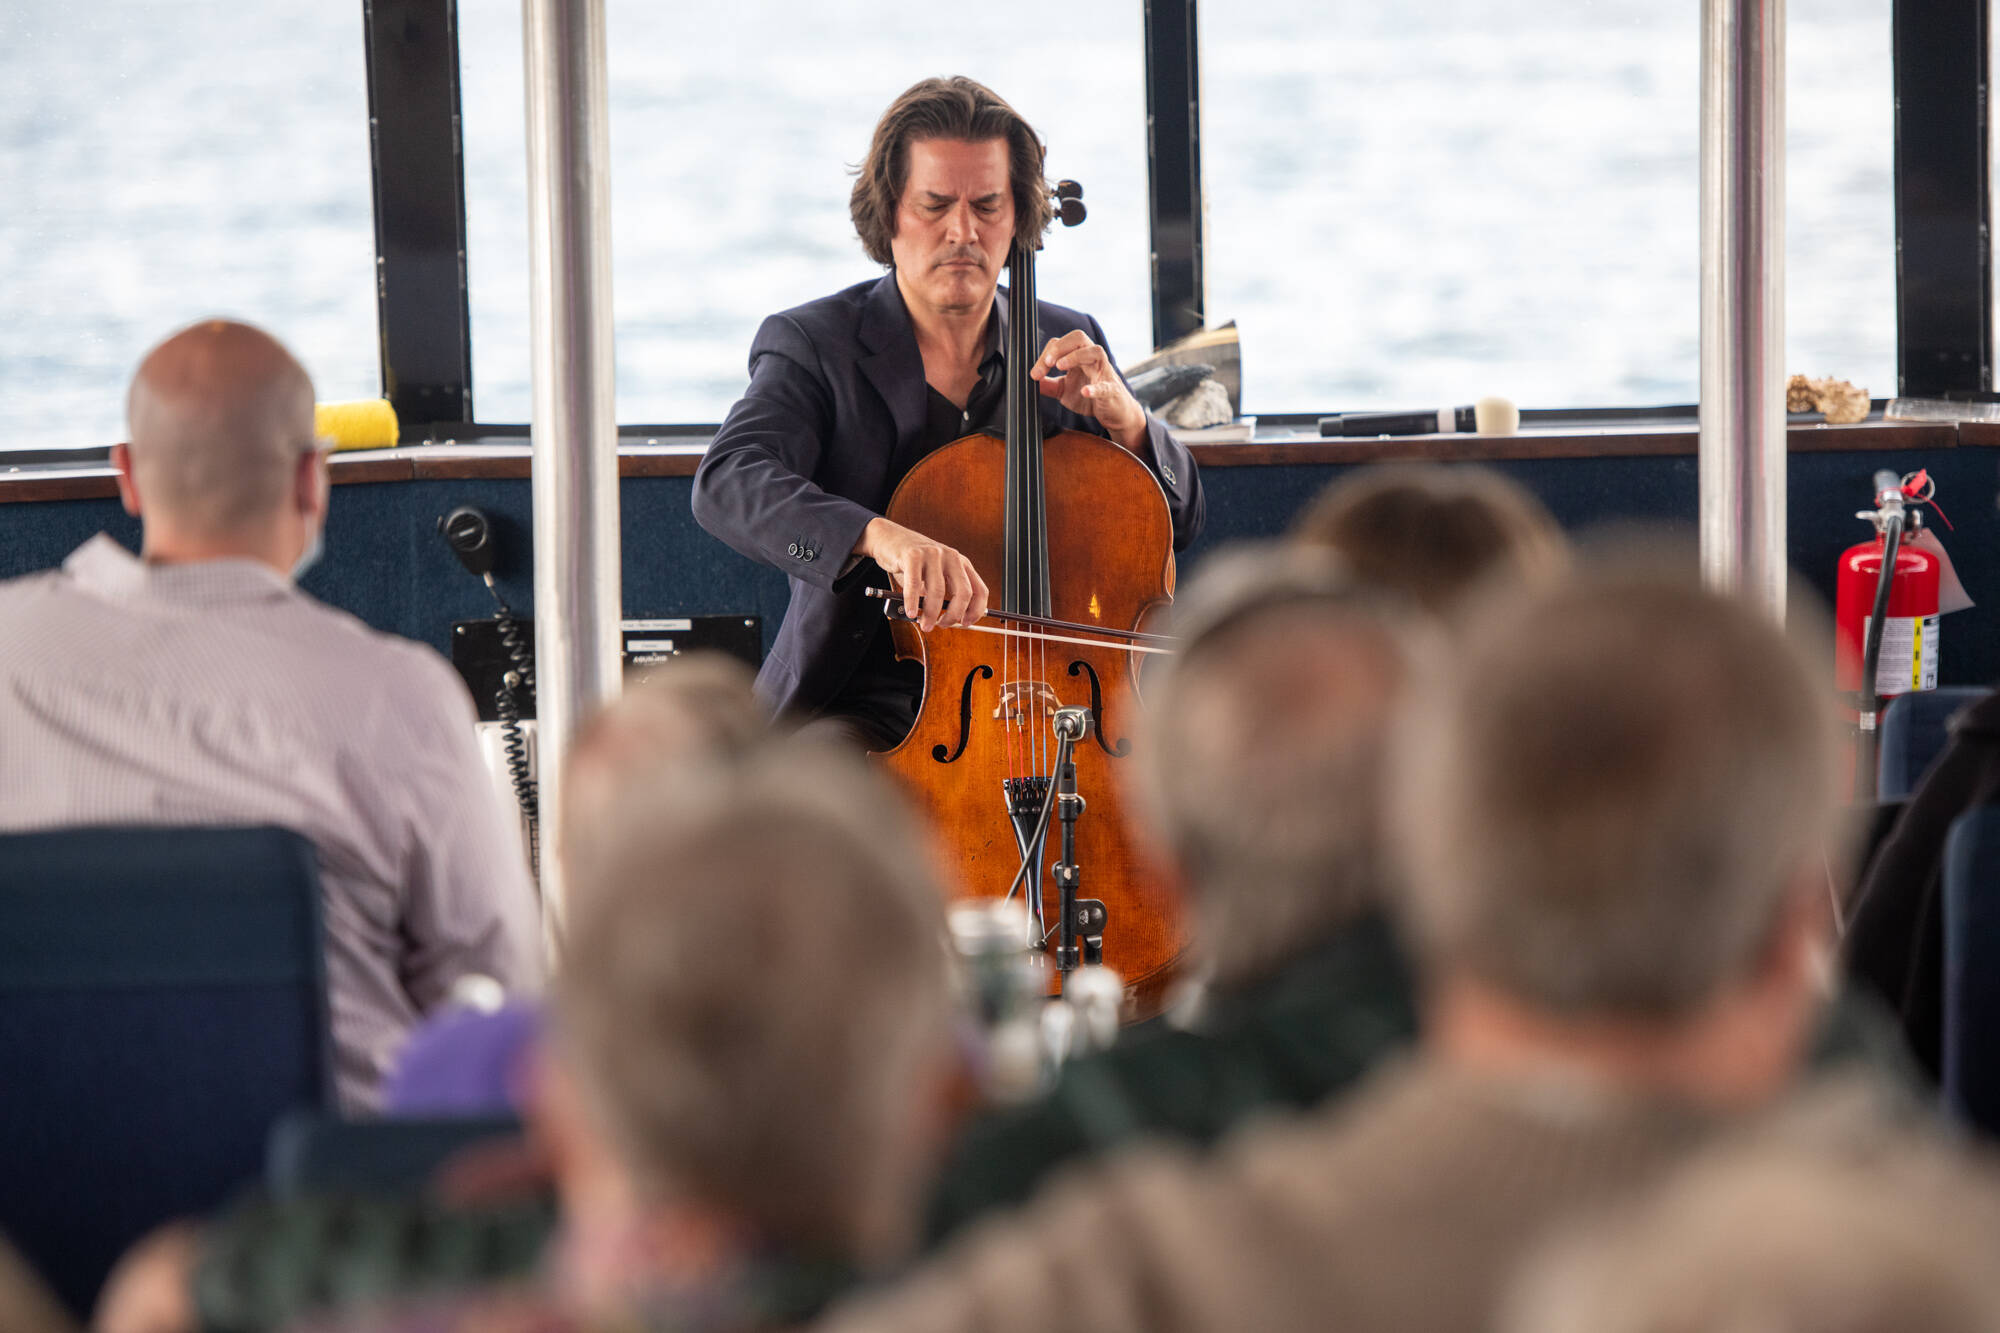 Courtesy Photos 
Zuill Bailey performs a cello concert during a music cruise in Auke Bay on Saturday afternoon.